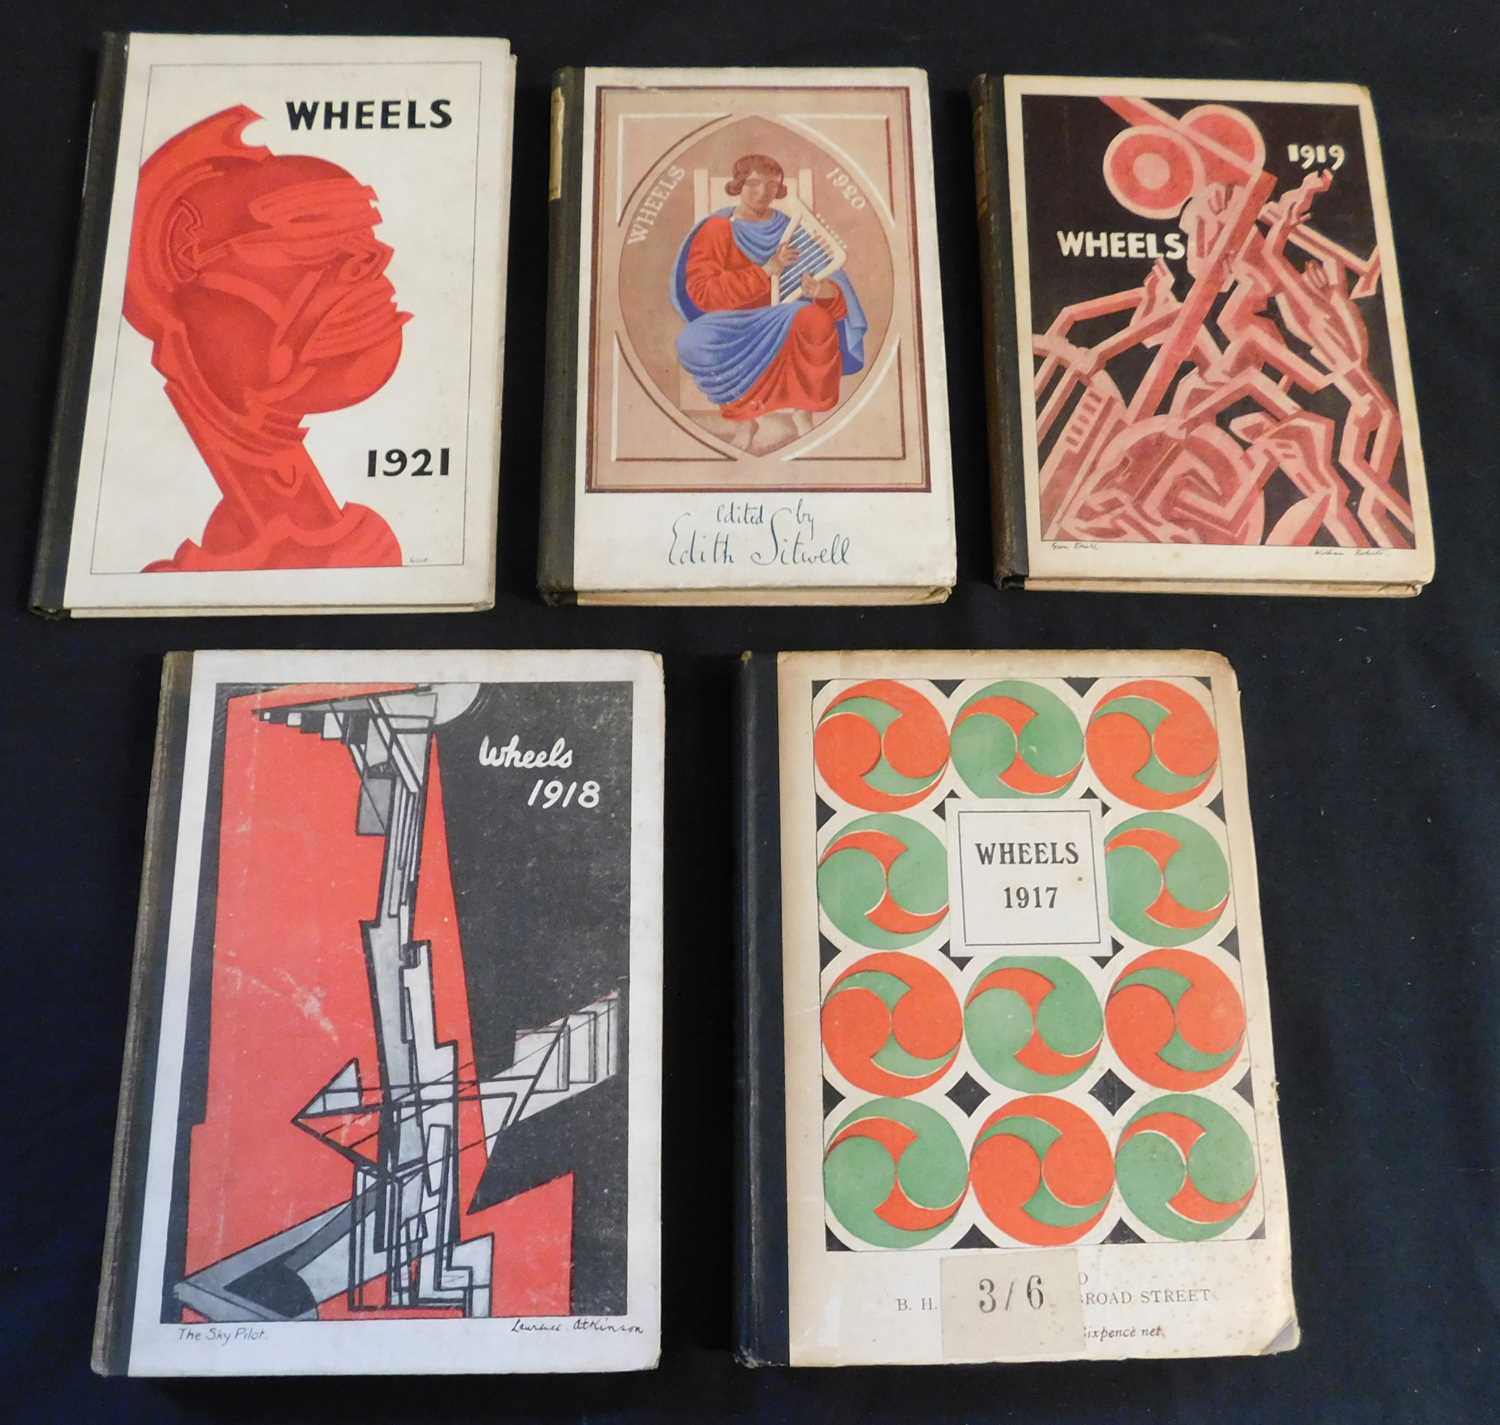 WHEELS A SECOND-THIRD-FOURTH-FIFTH-SIXTH CYCLE, London, 1917-21, 1st editions, 5 vols, 1st three